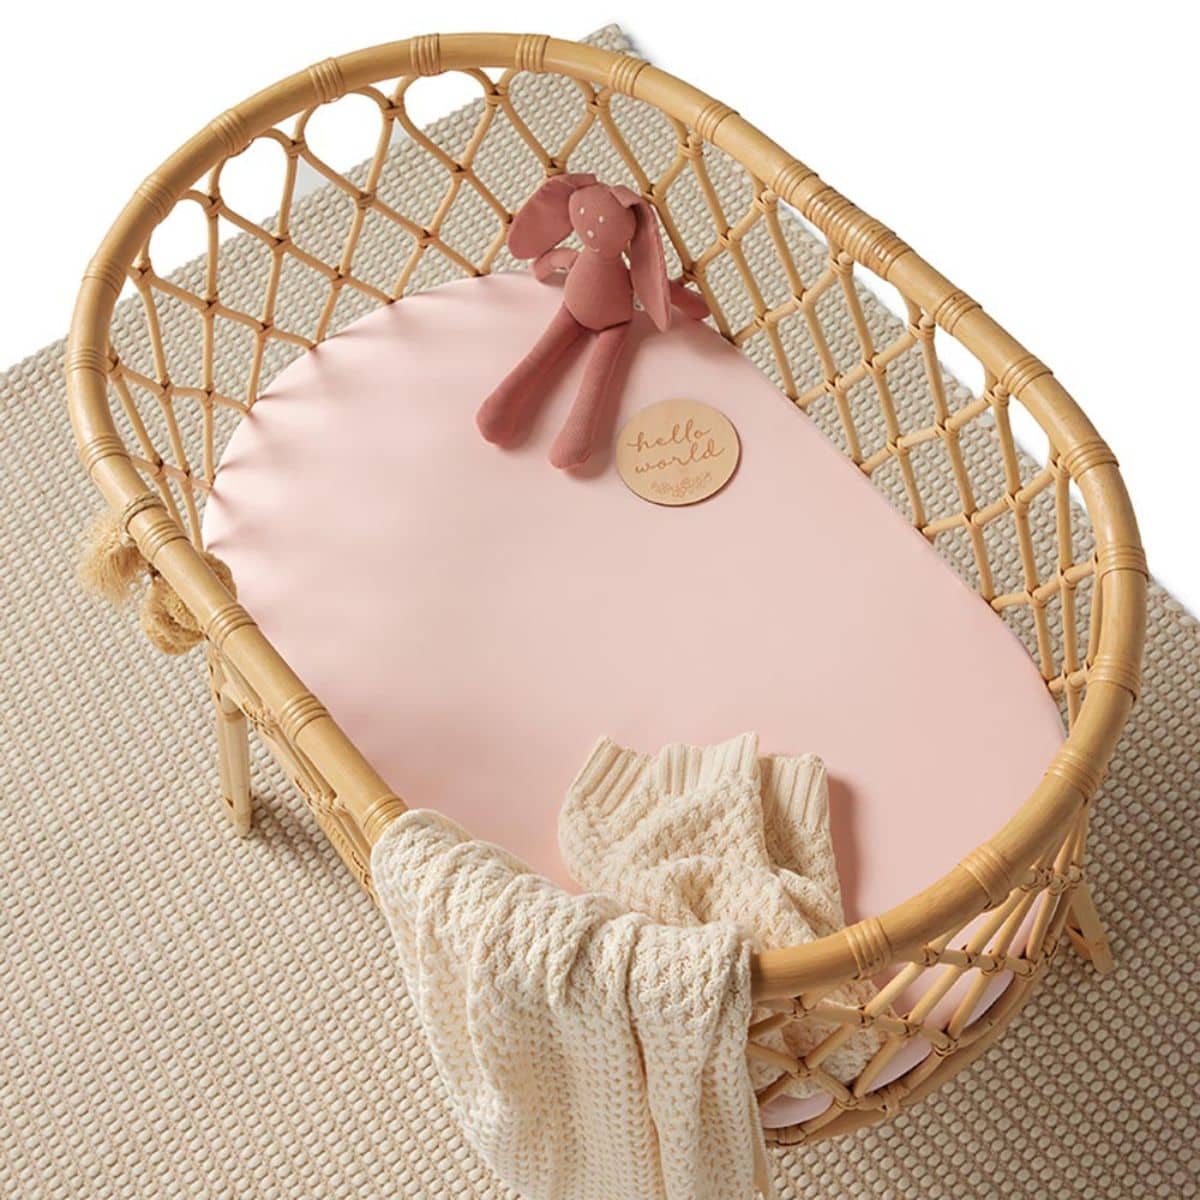 Snuggle Hunny Fitted Bassinet Sheet and Change Pad Cover - Baby Pink Organic